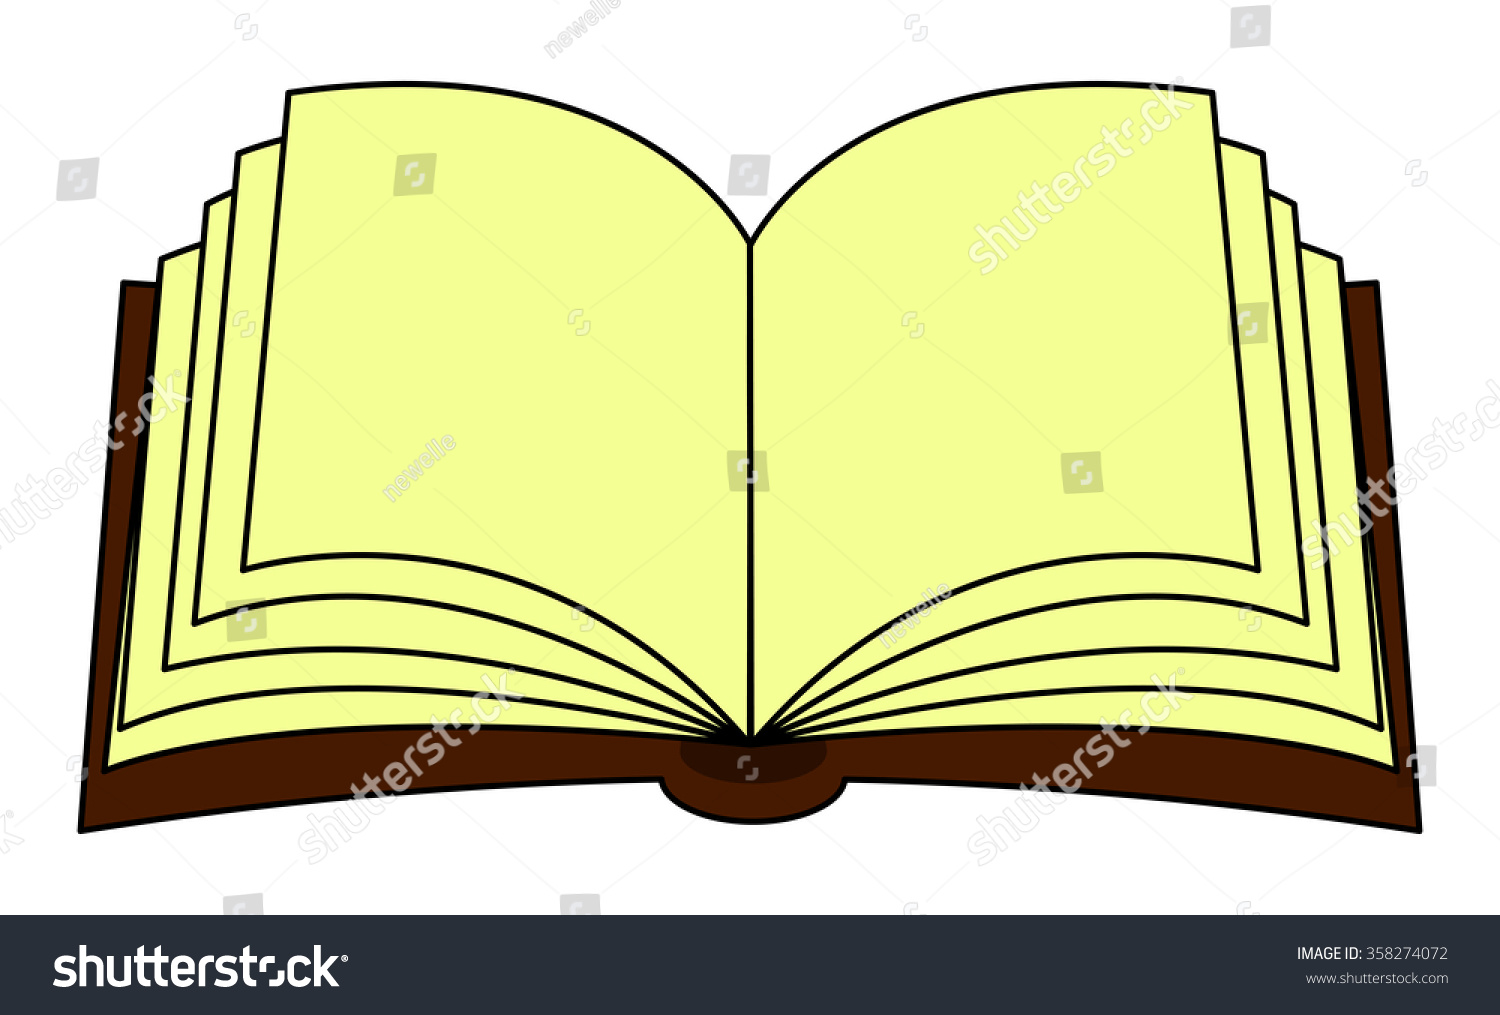 book clipart no background - photo #27